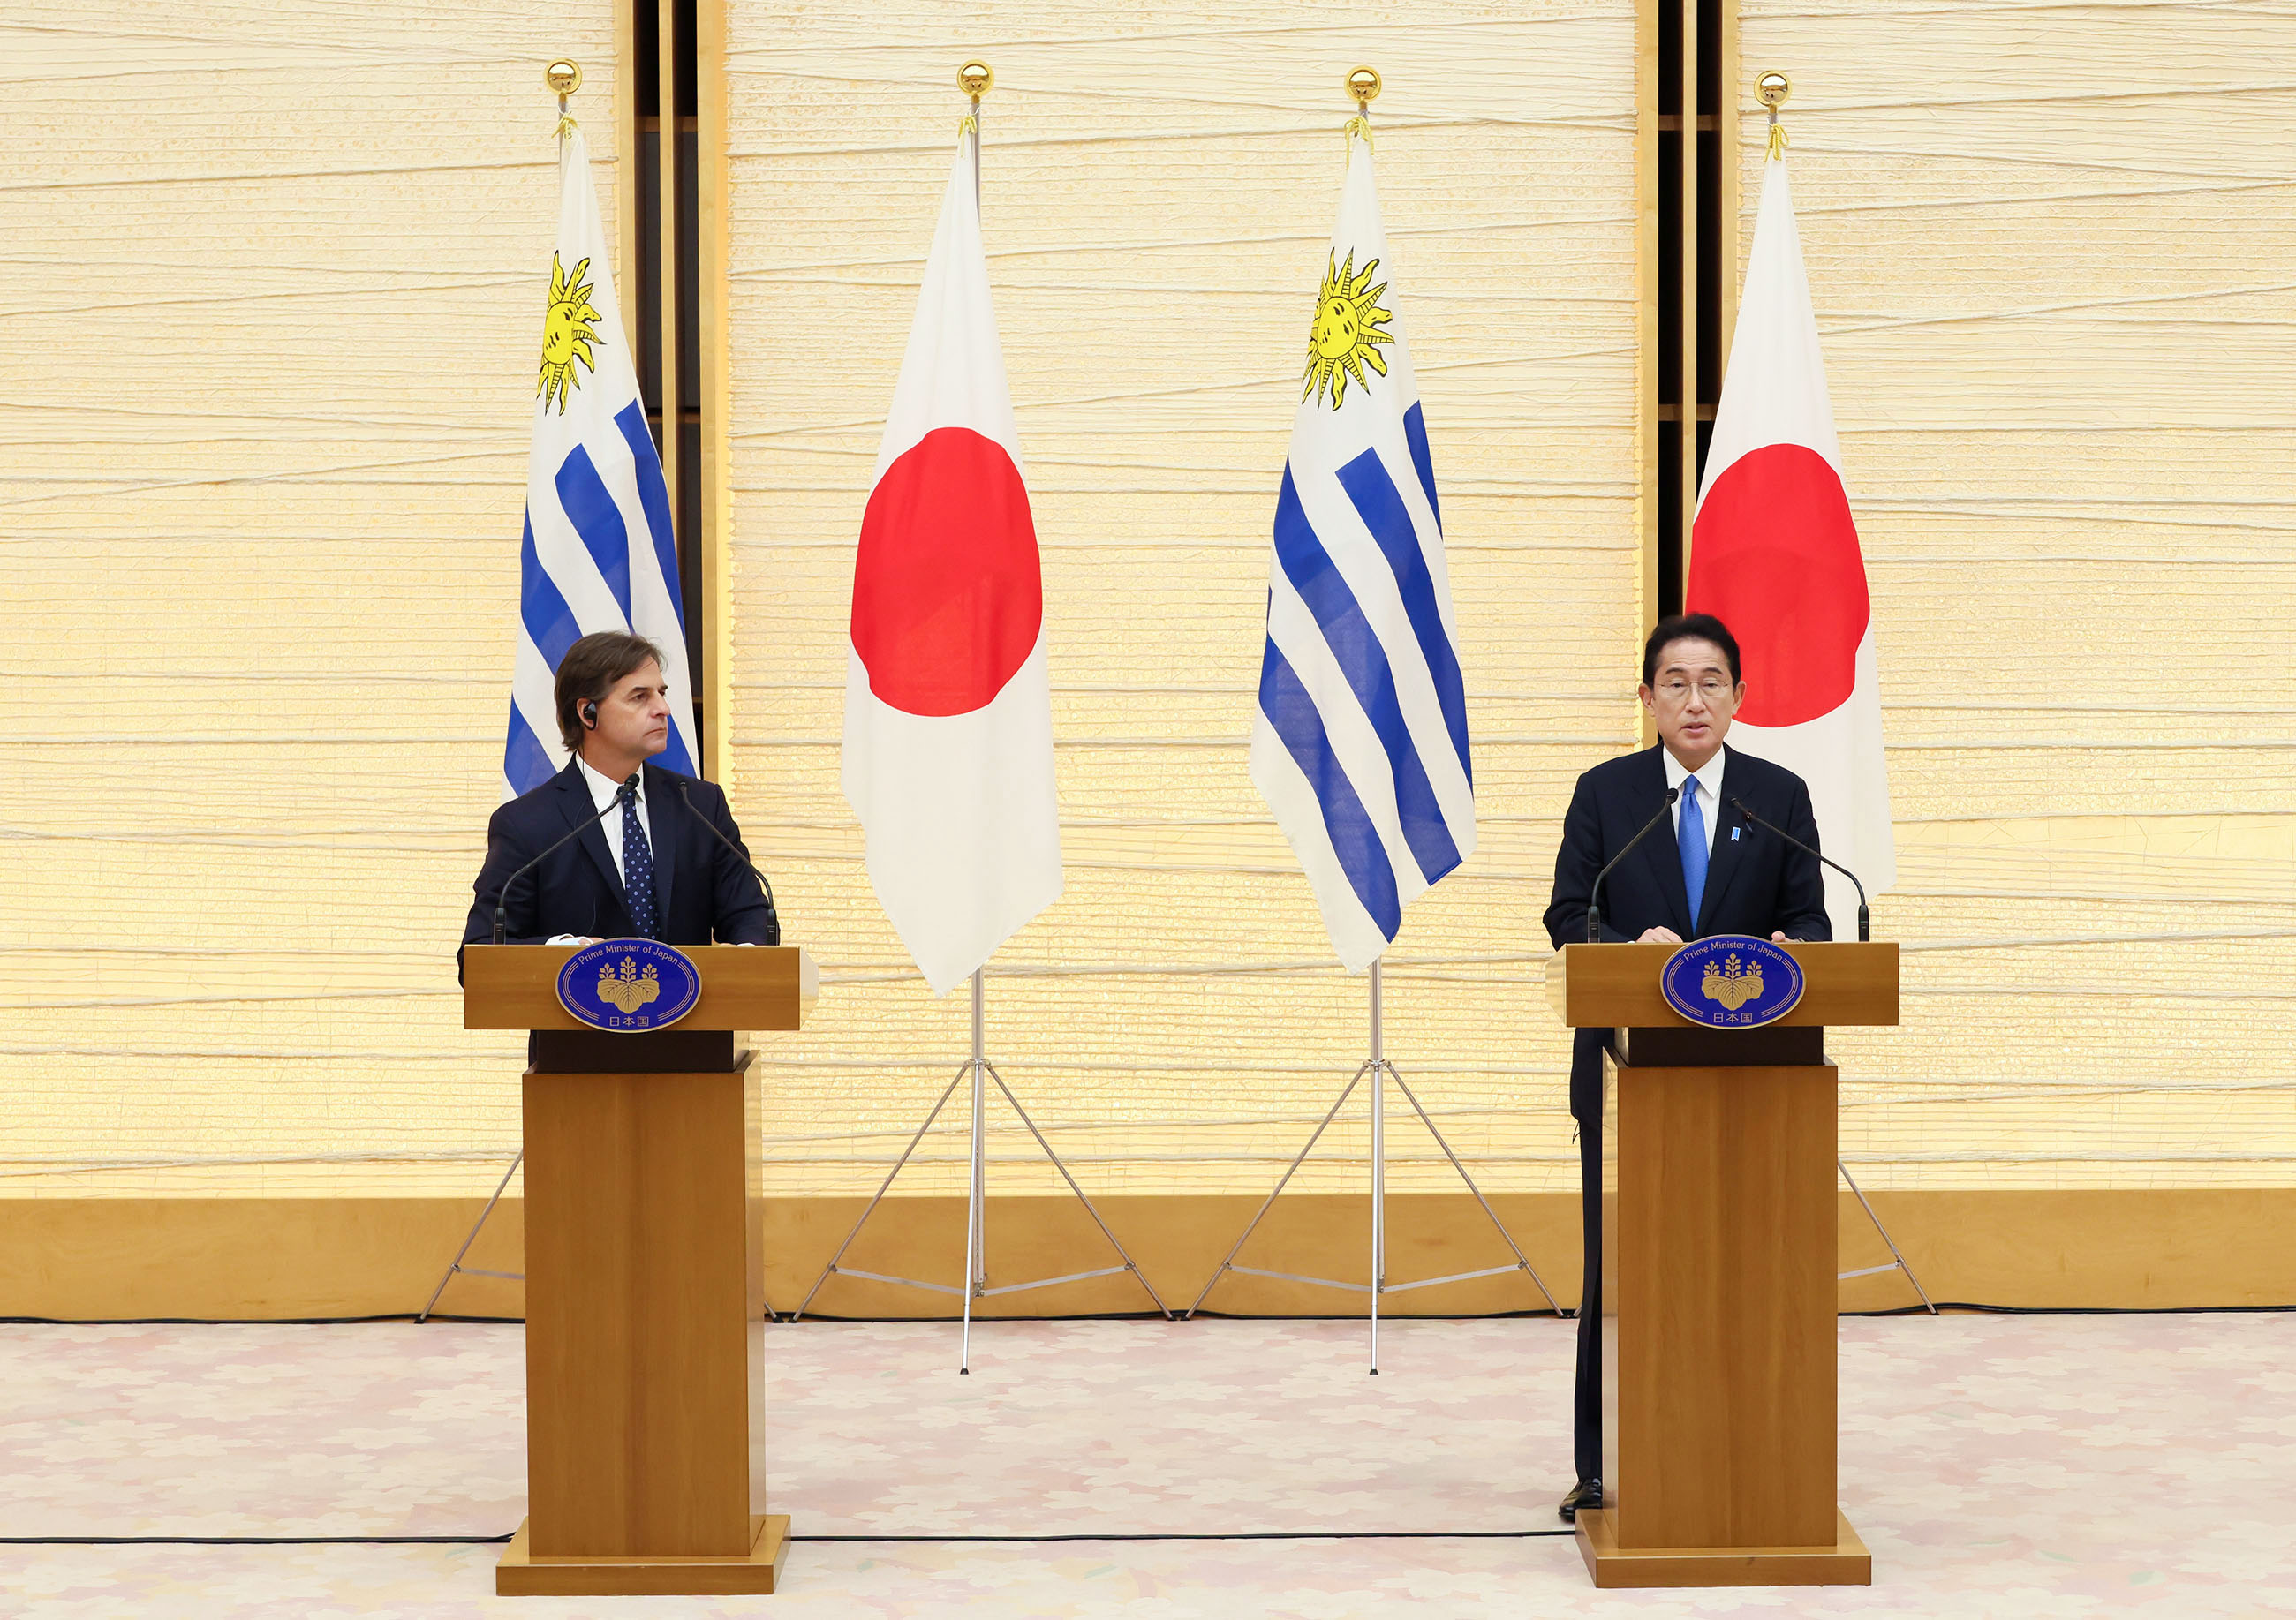 Photograph of the Japan-Uruguay joint press announcement (1)